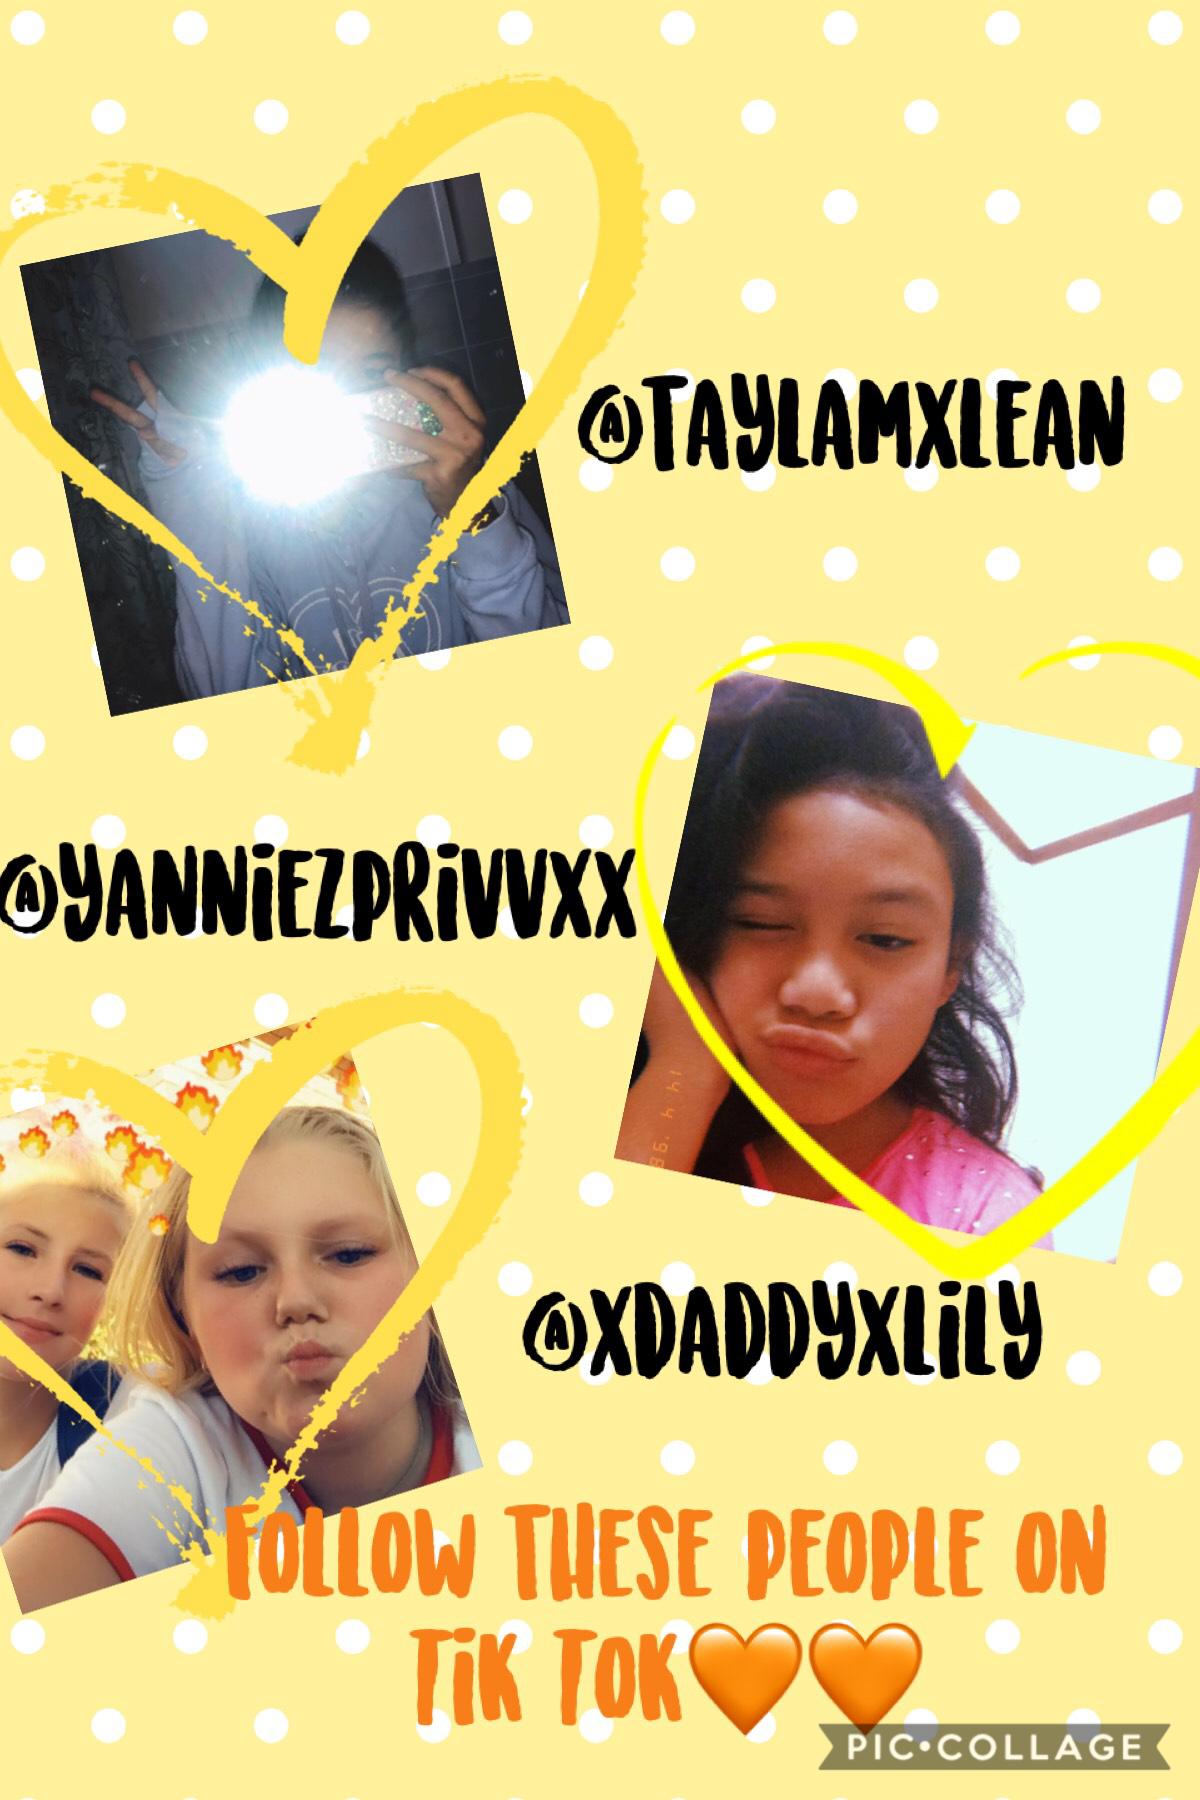 Follow these girls and I (@oofingsquadx is my name) then I will follow you back on Tik Tok❤️❤️❤️